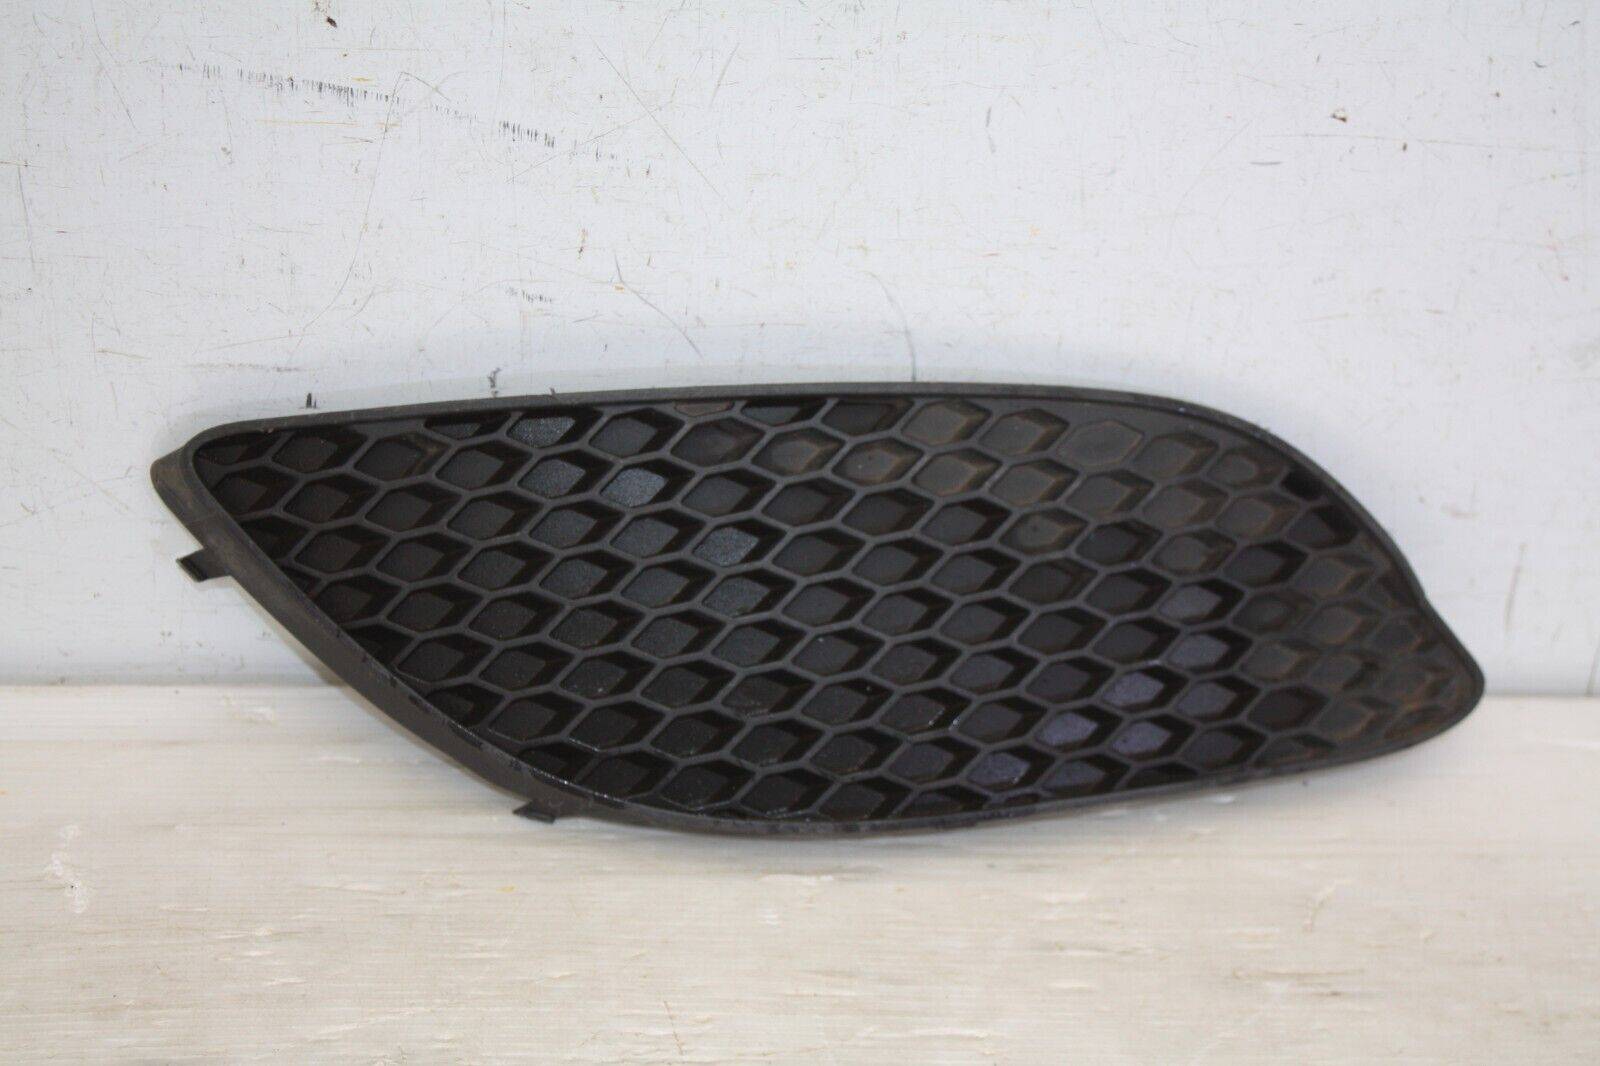 Vauxhall Zafira B Front Bumper Right Side Grill 2008 to 2014 13247321 Genuine 176037263593